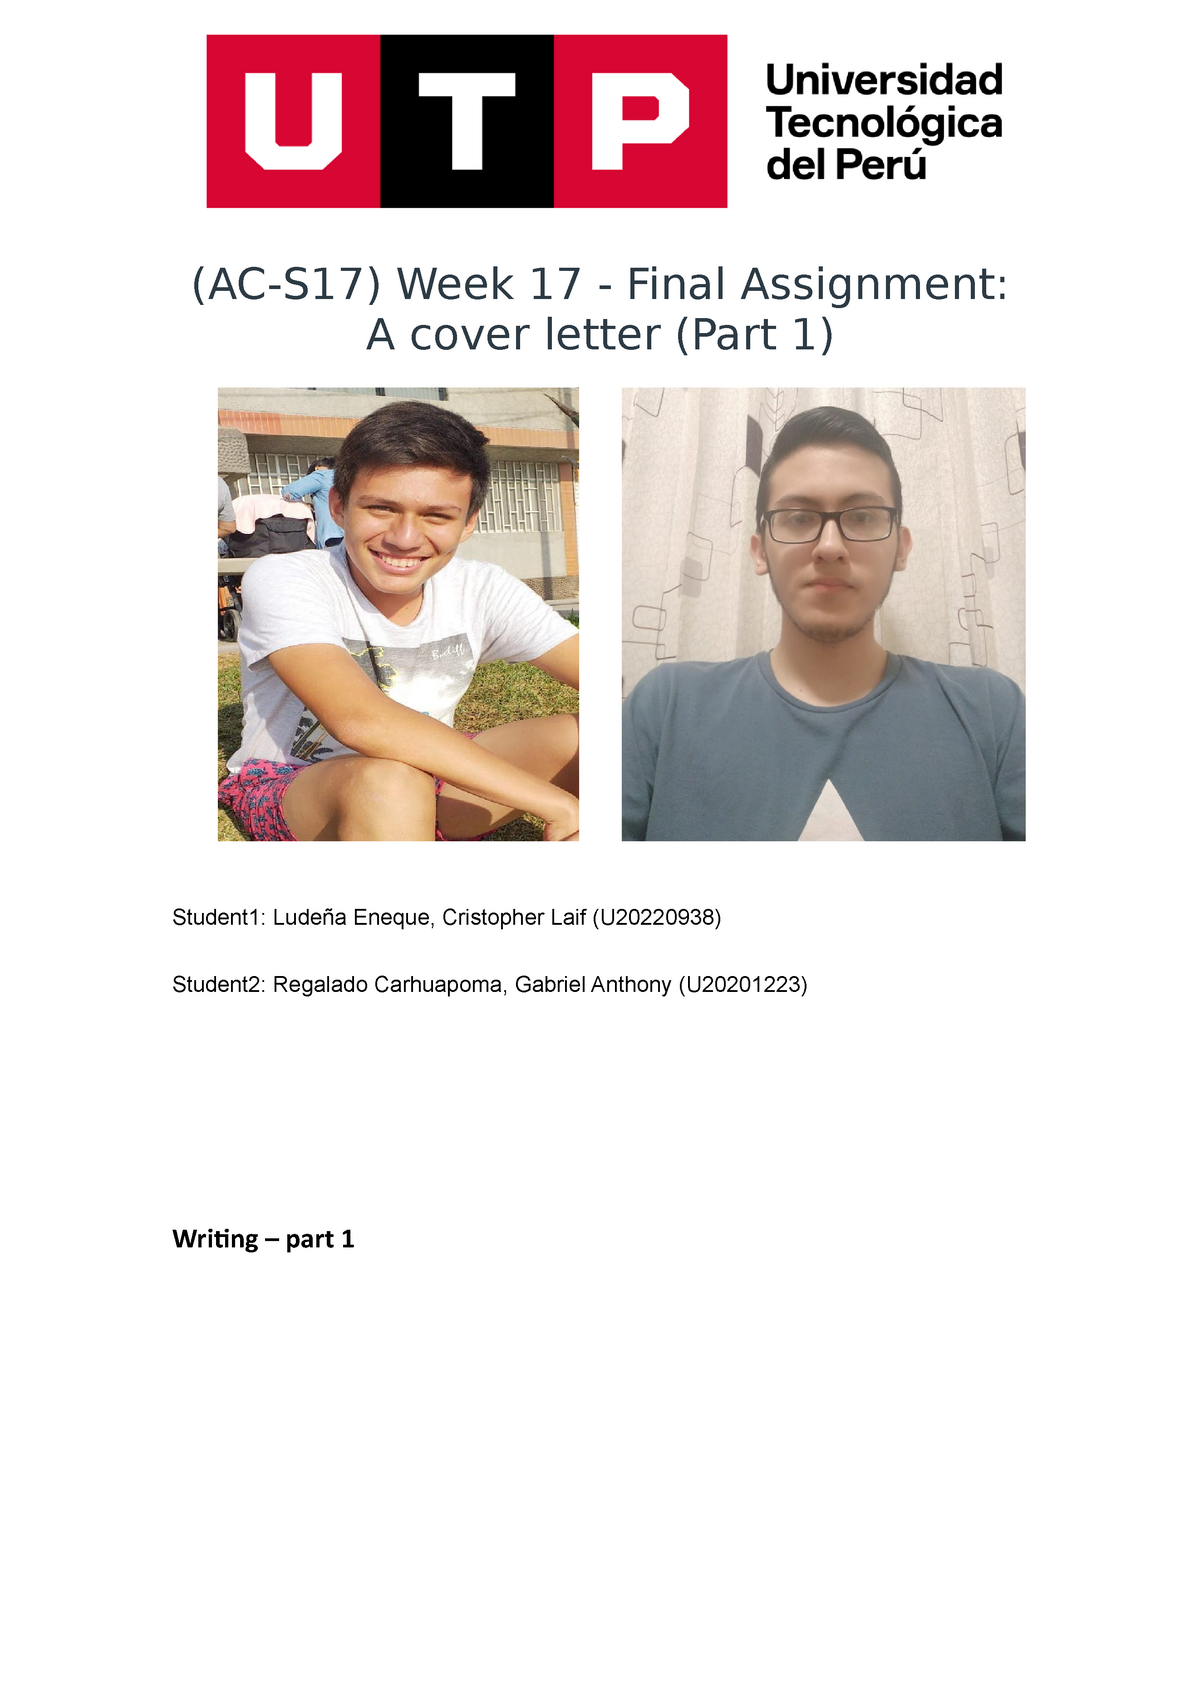 week 17 final assignment a cover letter (part 1)